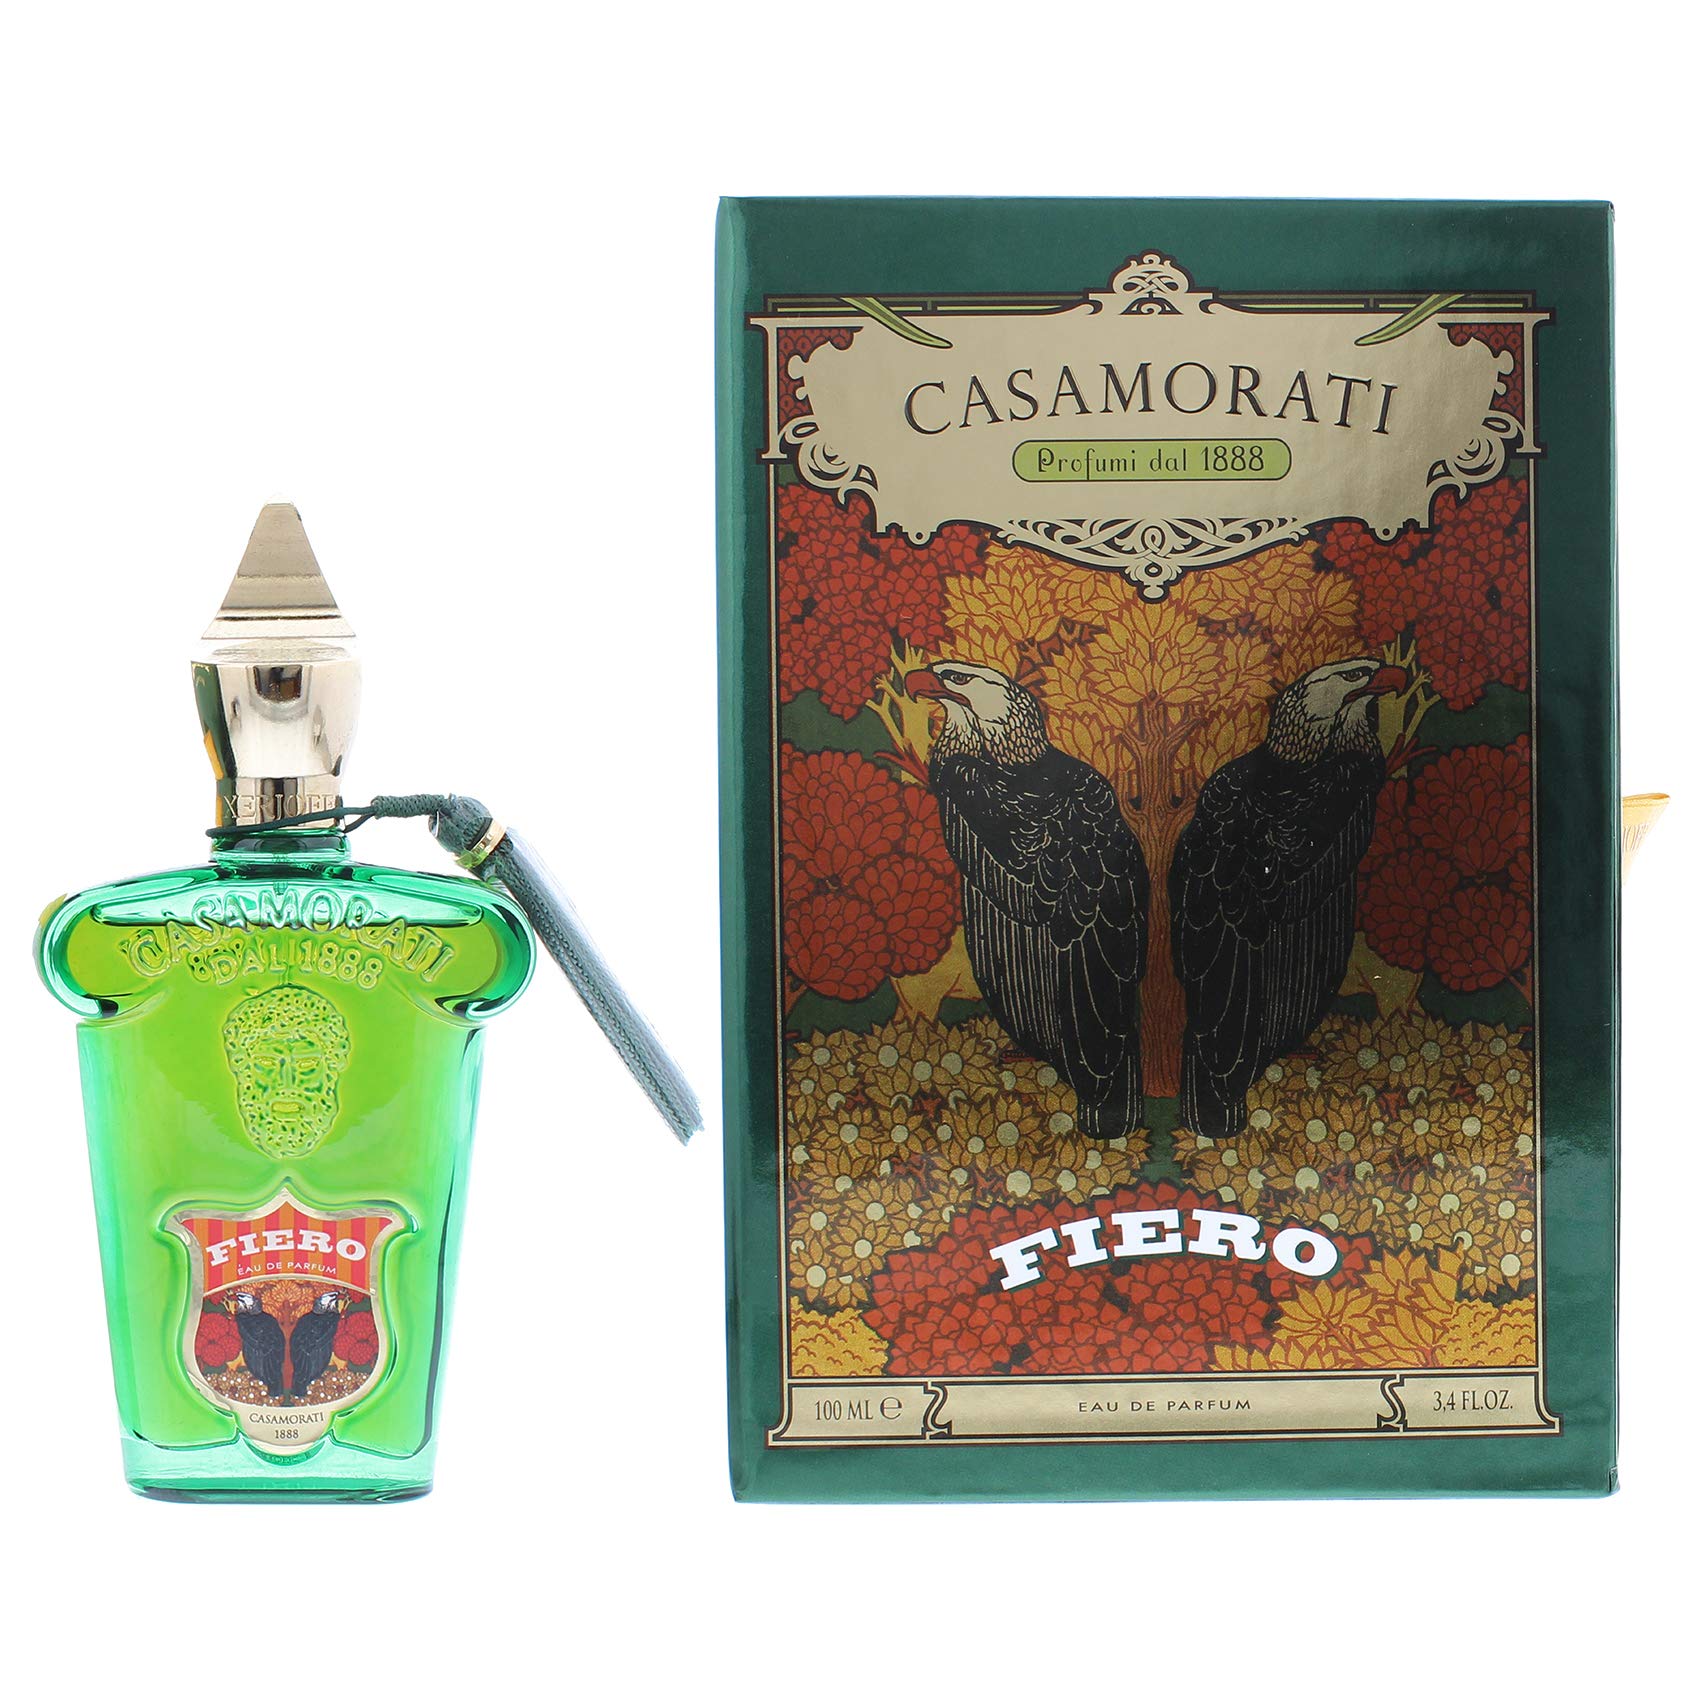 <span data-mce-fragment="1">What makes a masculine fragrance old-school: ingredients, strength or style? In the case of Fiero, it's all of the above- a powerhouse of citrus, neroli, vetiver and spices with a classic fougere-style sensibility that's as captivatingly seductive as it is intense. Opening with bright, tart lemon, Fiero quickly starts rounding out its profile with the development of clean, full-bodied neroli, adding a green freshness. As the scent drys further, a dizzying array of spices and spiced ingredients come to the fore: rich, smoky vetiver, sharply bitter tarragon, and soapy, musky freshness that all combine to radiate classic, extremely sexy confidence. Signature scents can't leave much more of a signature than this one.</span>